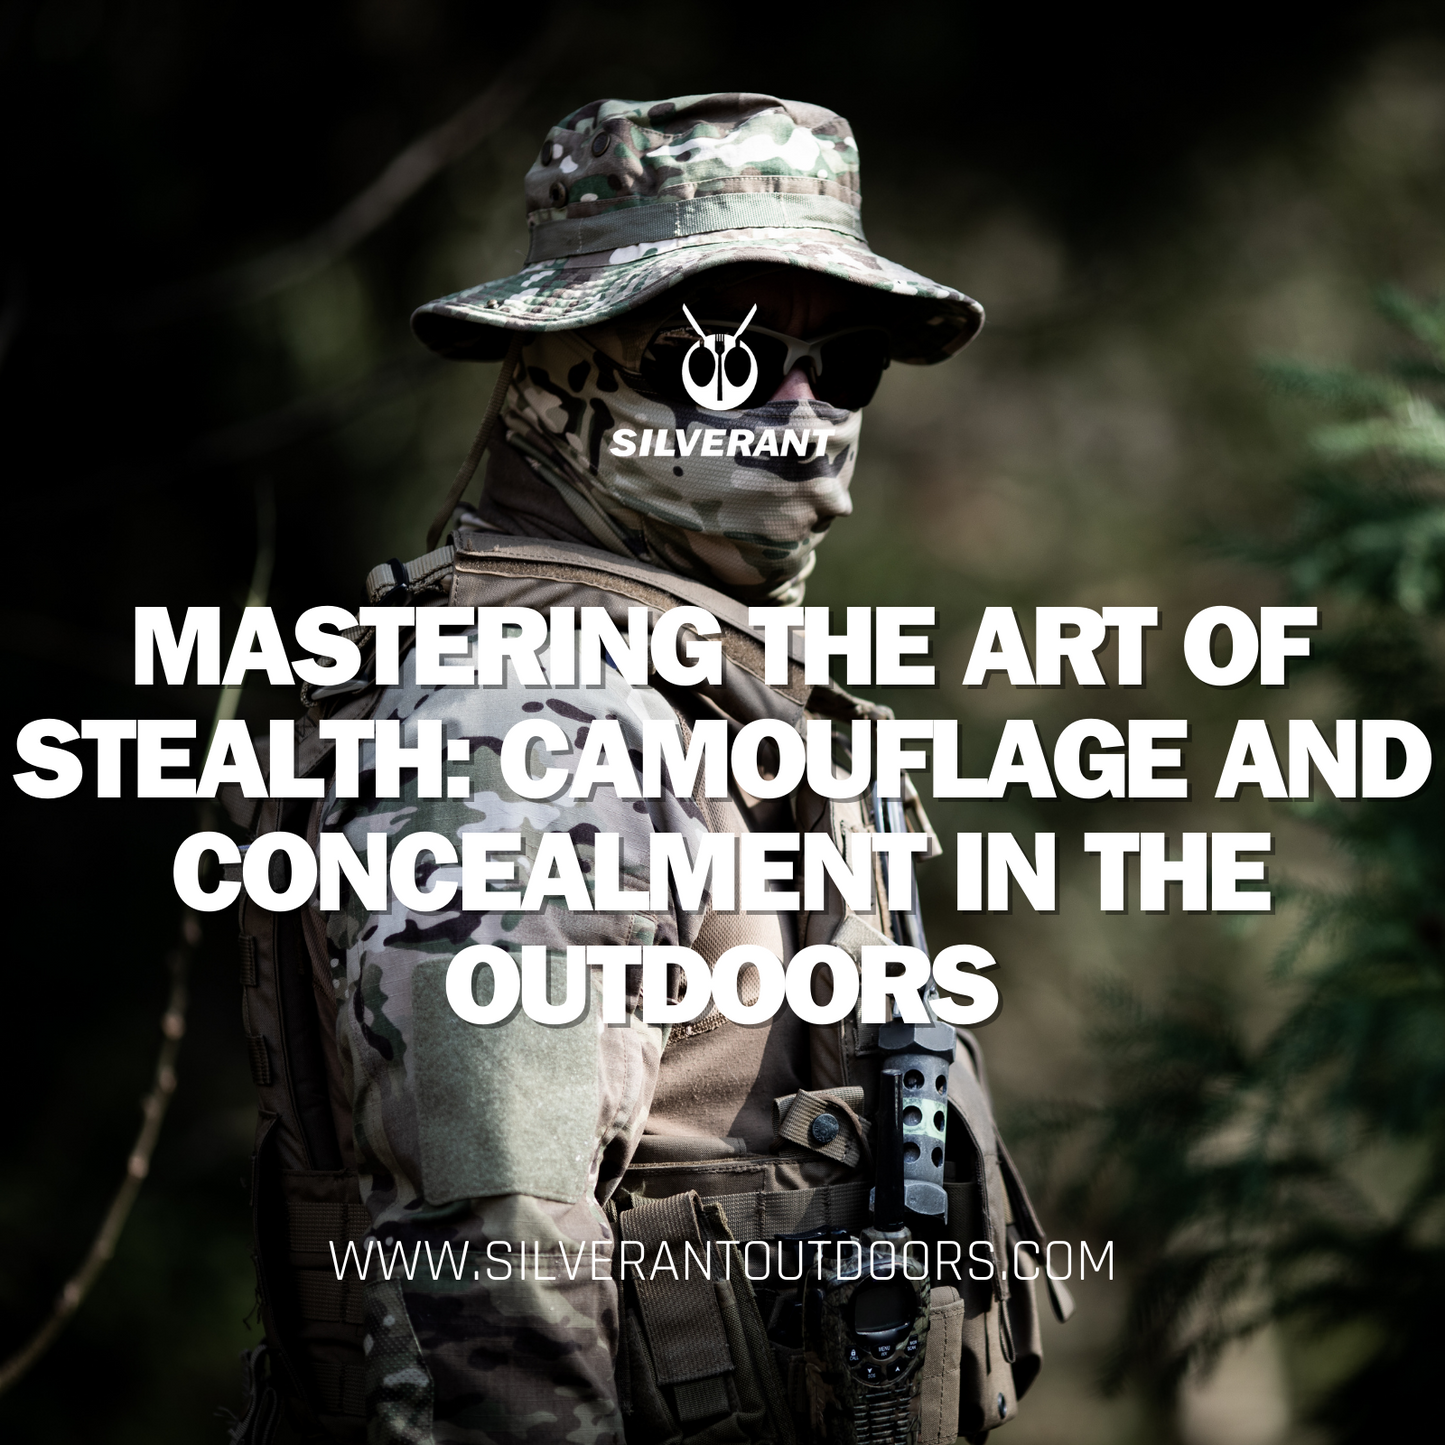 Mastering the Art of Stealth: Camouflage and Concealment Outdoors